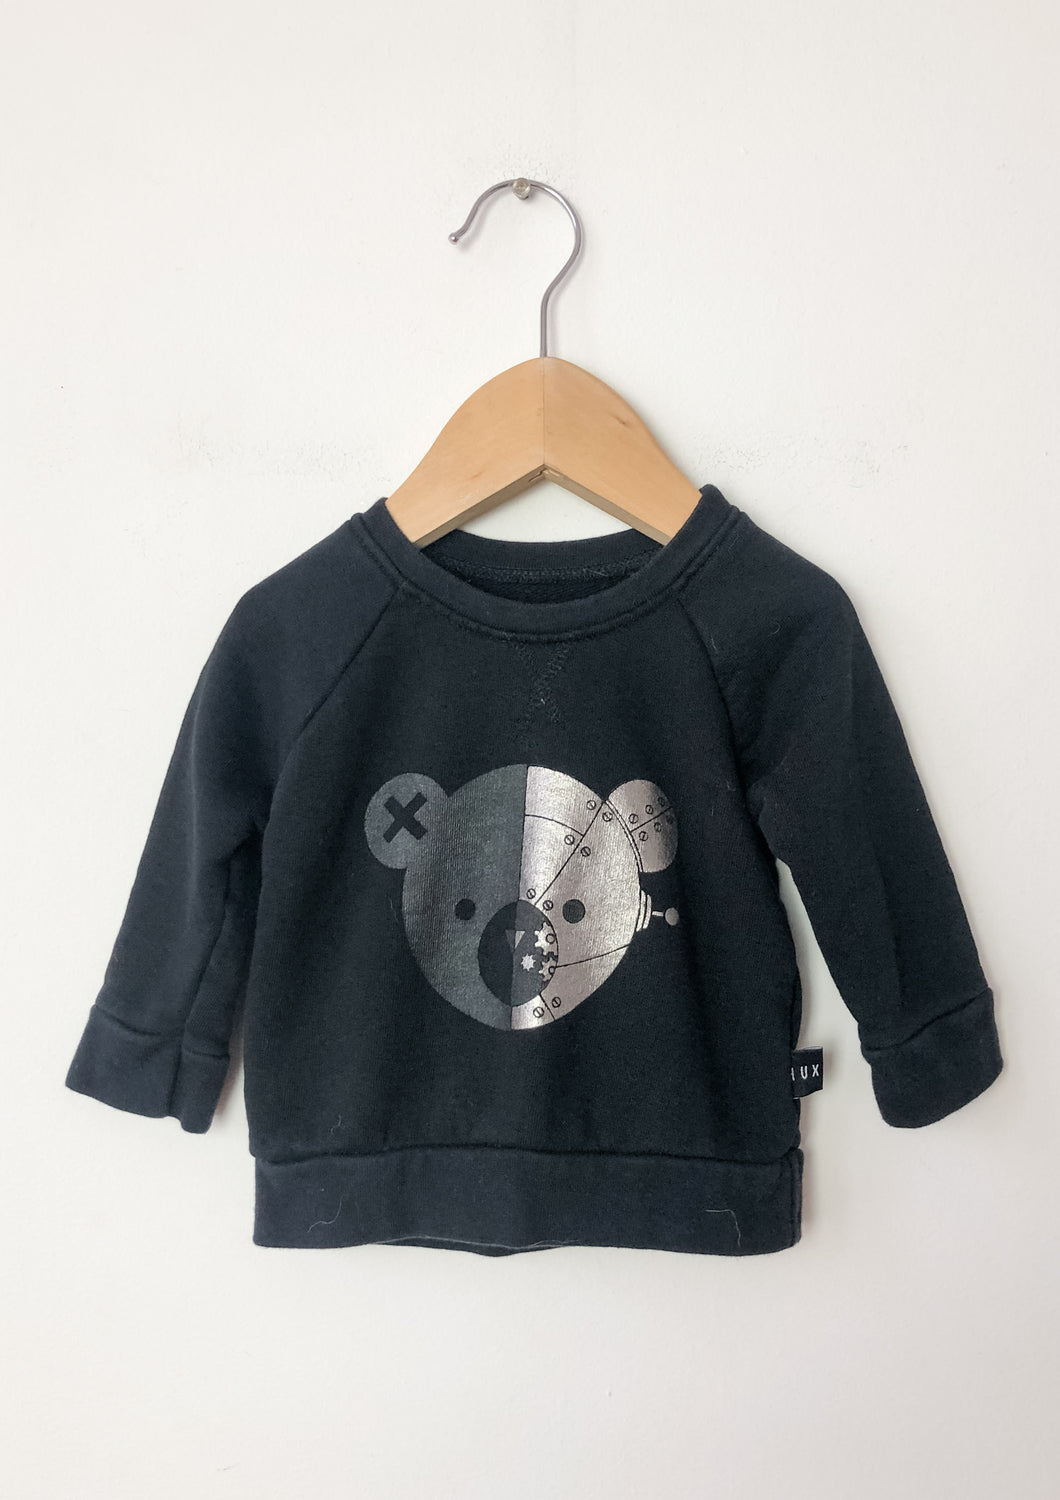 Black Hux Baby Sweater Size 3-6 Months